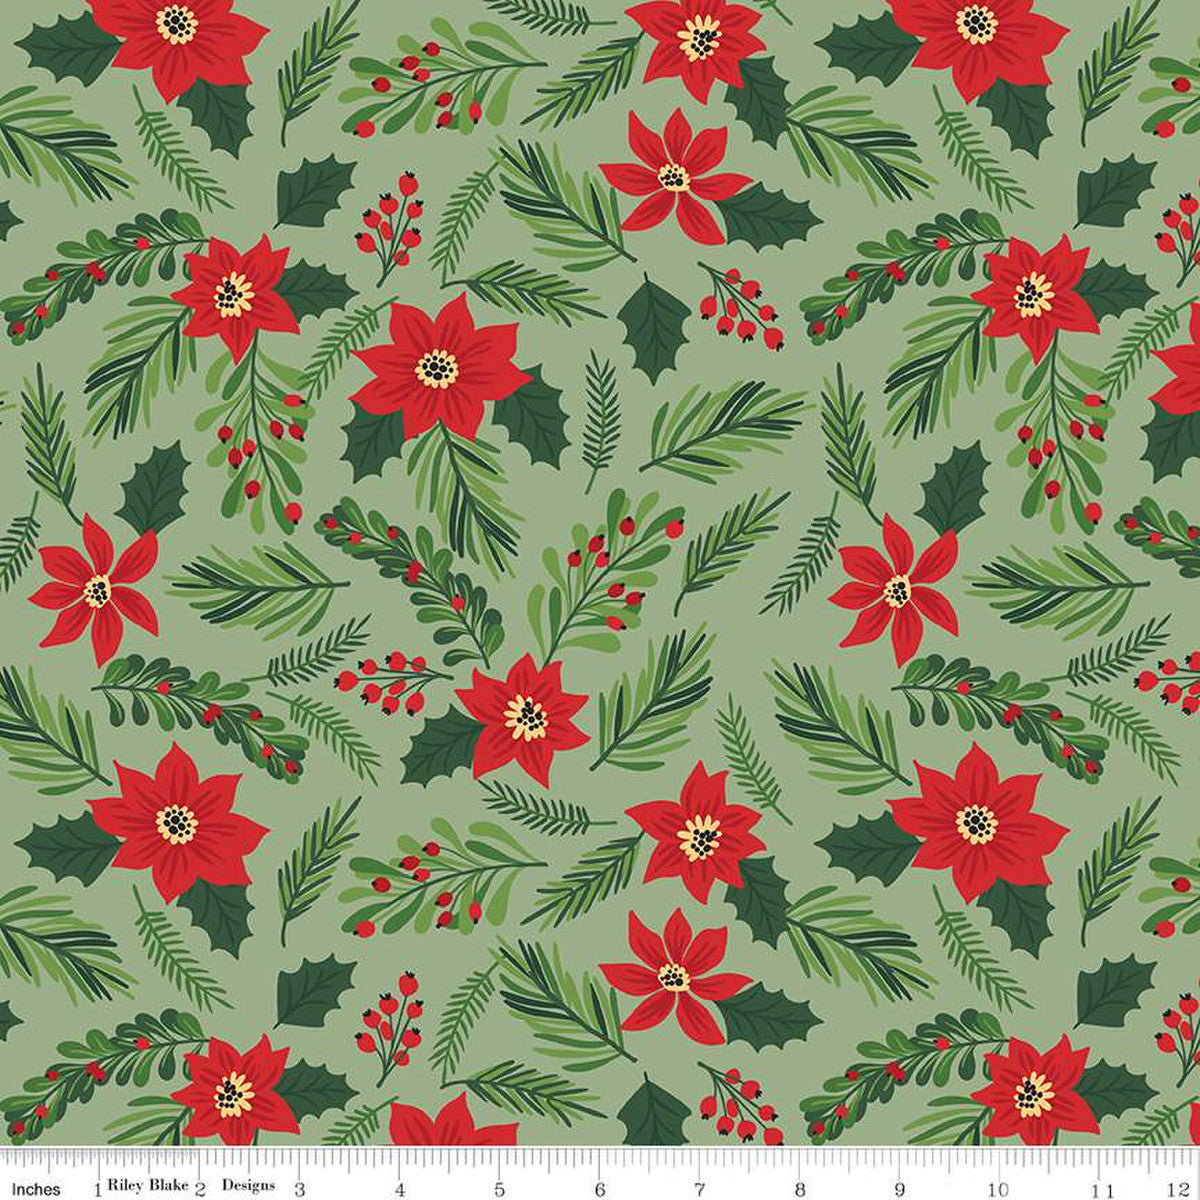 This print features sprigs of poinsettias, leaves, and berries.